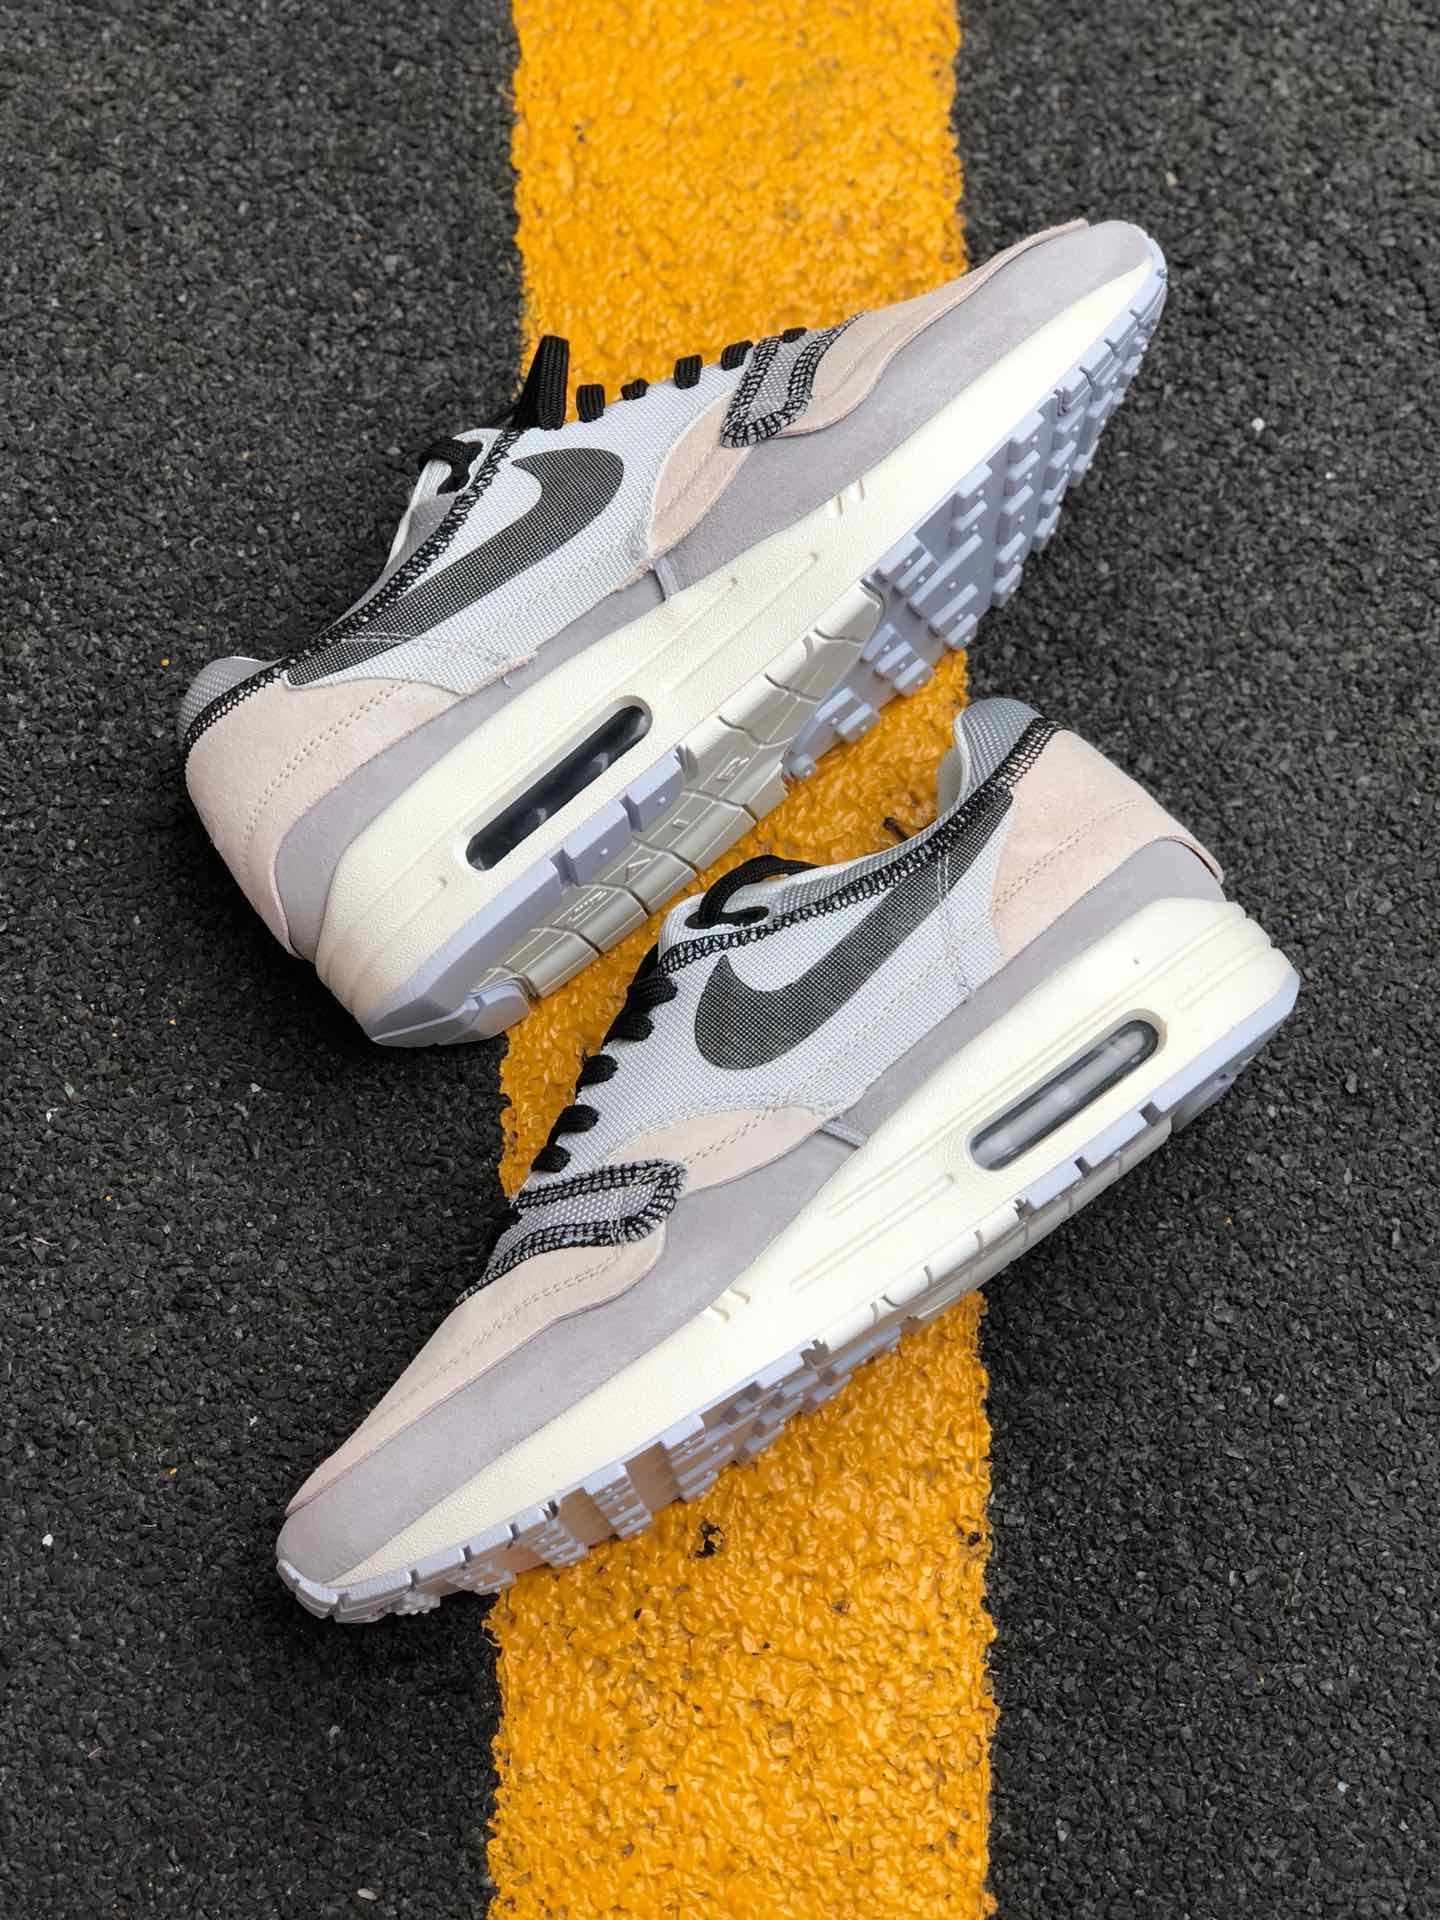 Nike Air Max 1 Inside Out Light Grey Beige-White On Sale